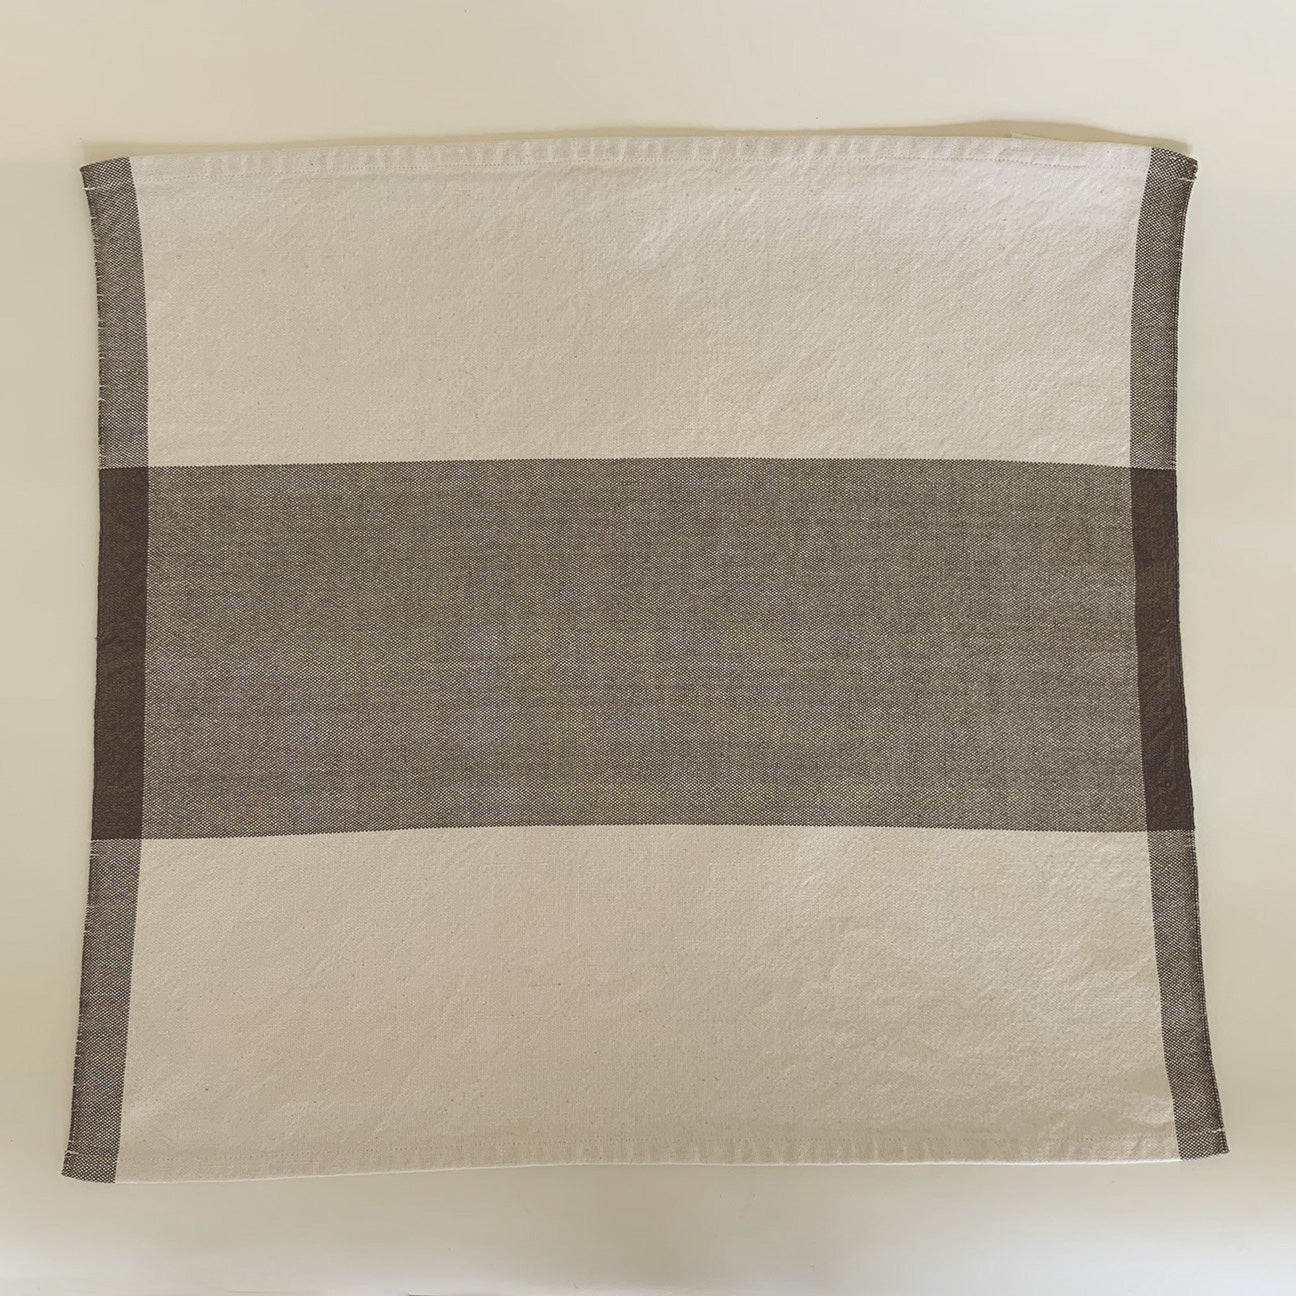 Image of M+A Colorblock Napkin in Kora/Mineral.